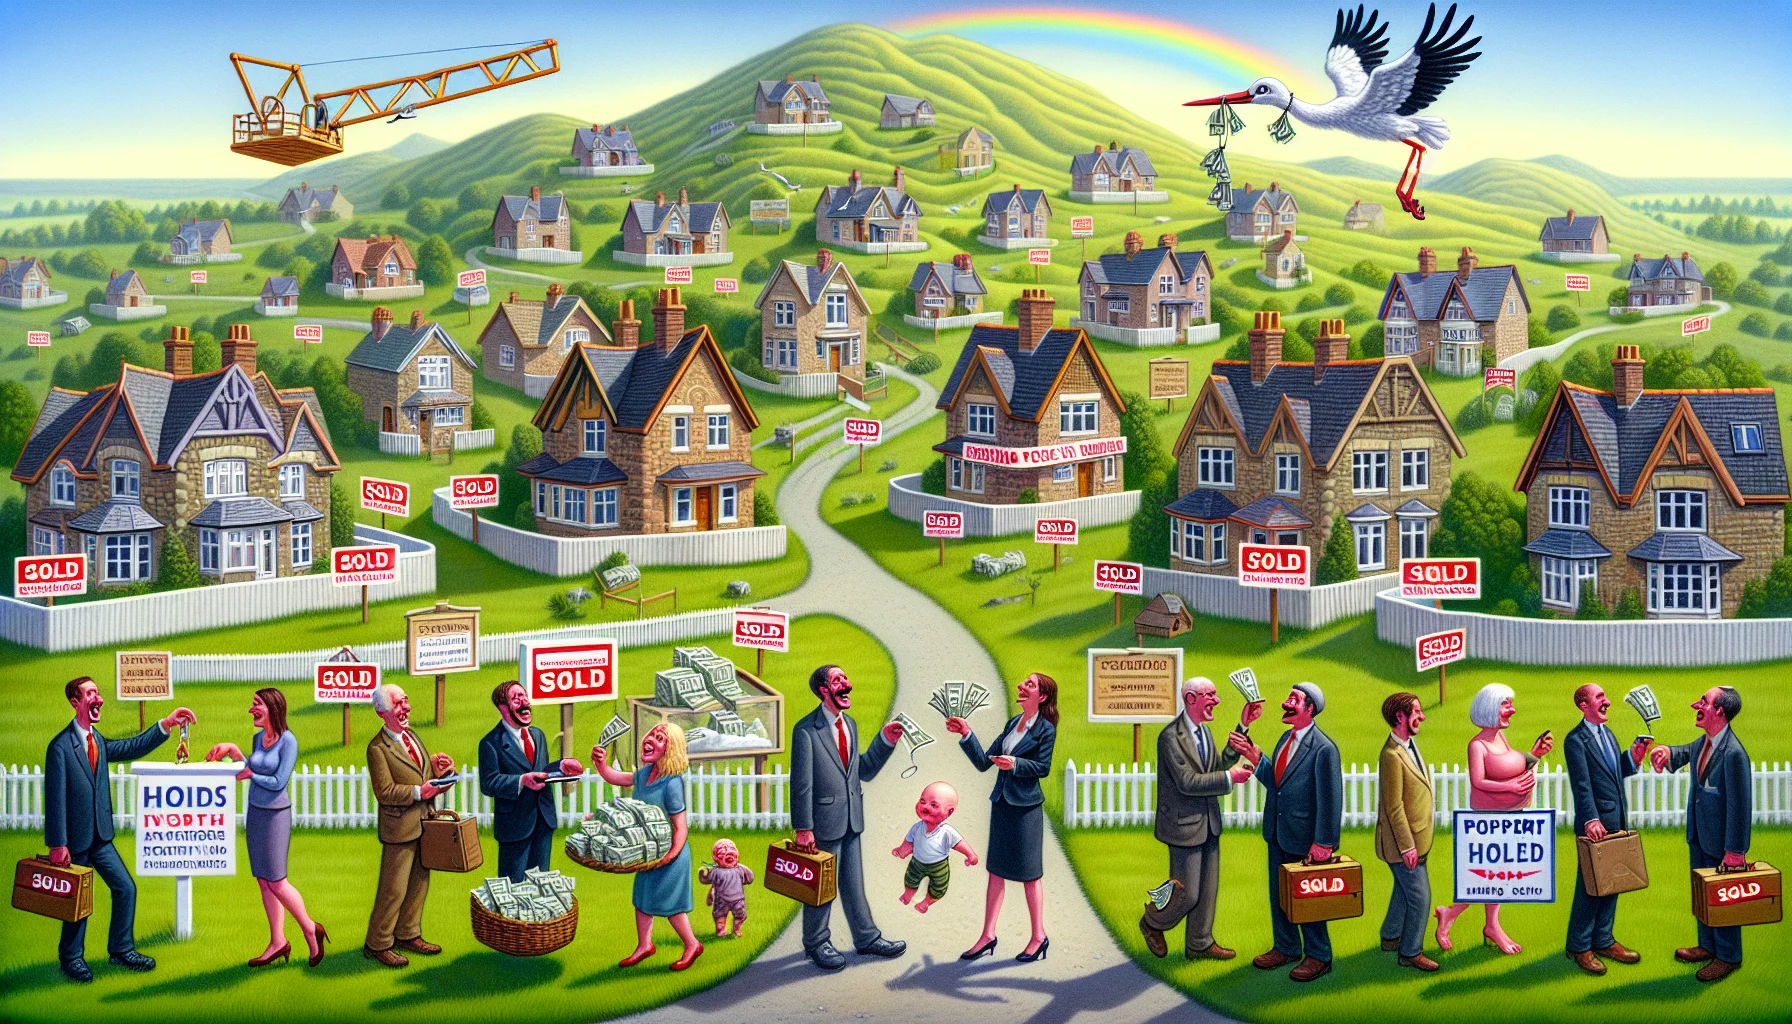 Imagine a humorous tableau of perfect real-estate investment opportunities. An idyllic, picturesque small town at the base of verdant hills. Every quaint house displaying 'Sold' signs, realtors with broad smiles, handing keys to happy home buyers of diverse descents and genders. A ticker on a billboard displaying skyrocketing property values. Above, a clear sky with a rainbow, and a stork carrying a bundle of cash instead of a baby, symbolizing unexpected financial gains. In the distance, brand new buildings under construction, capturing more interest on the horizon.